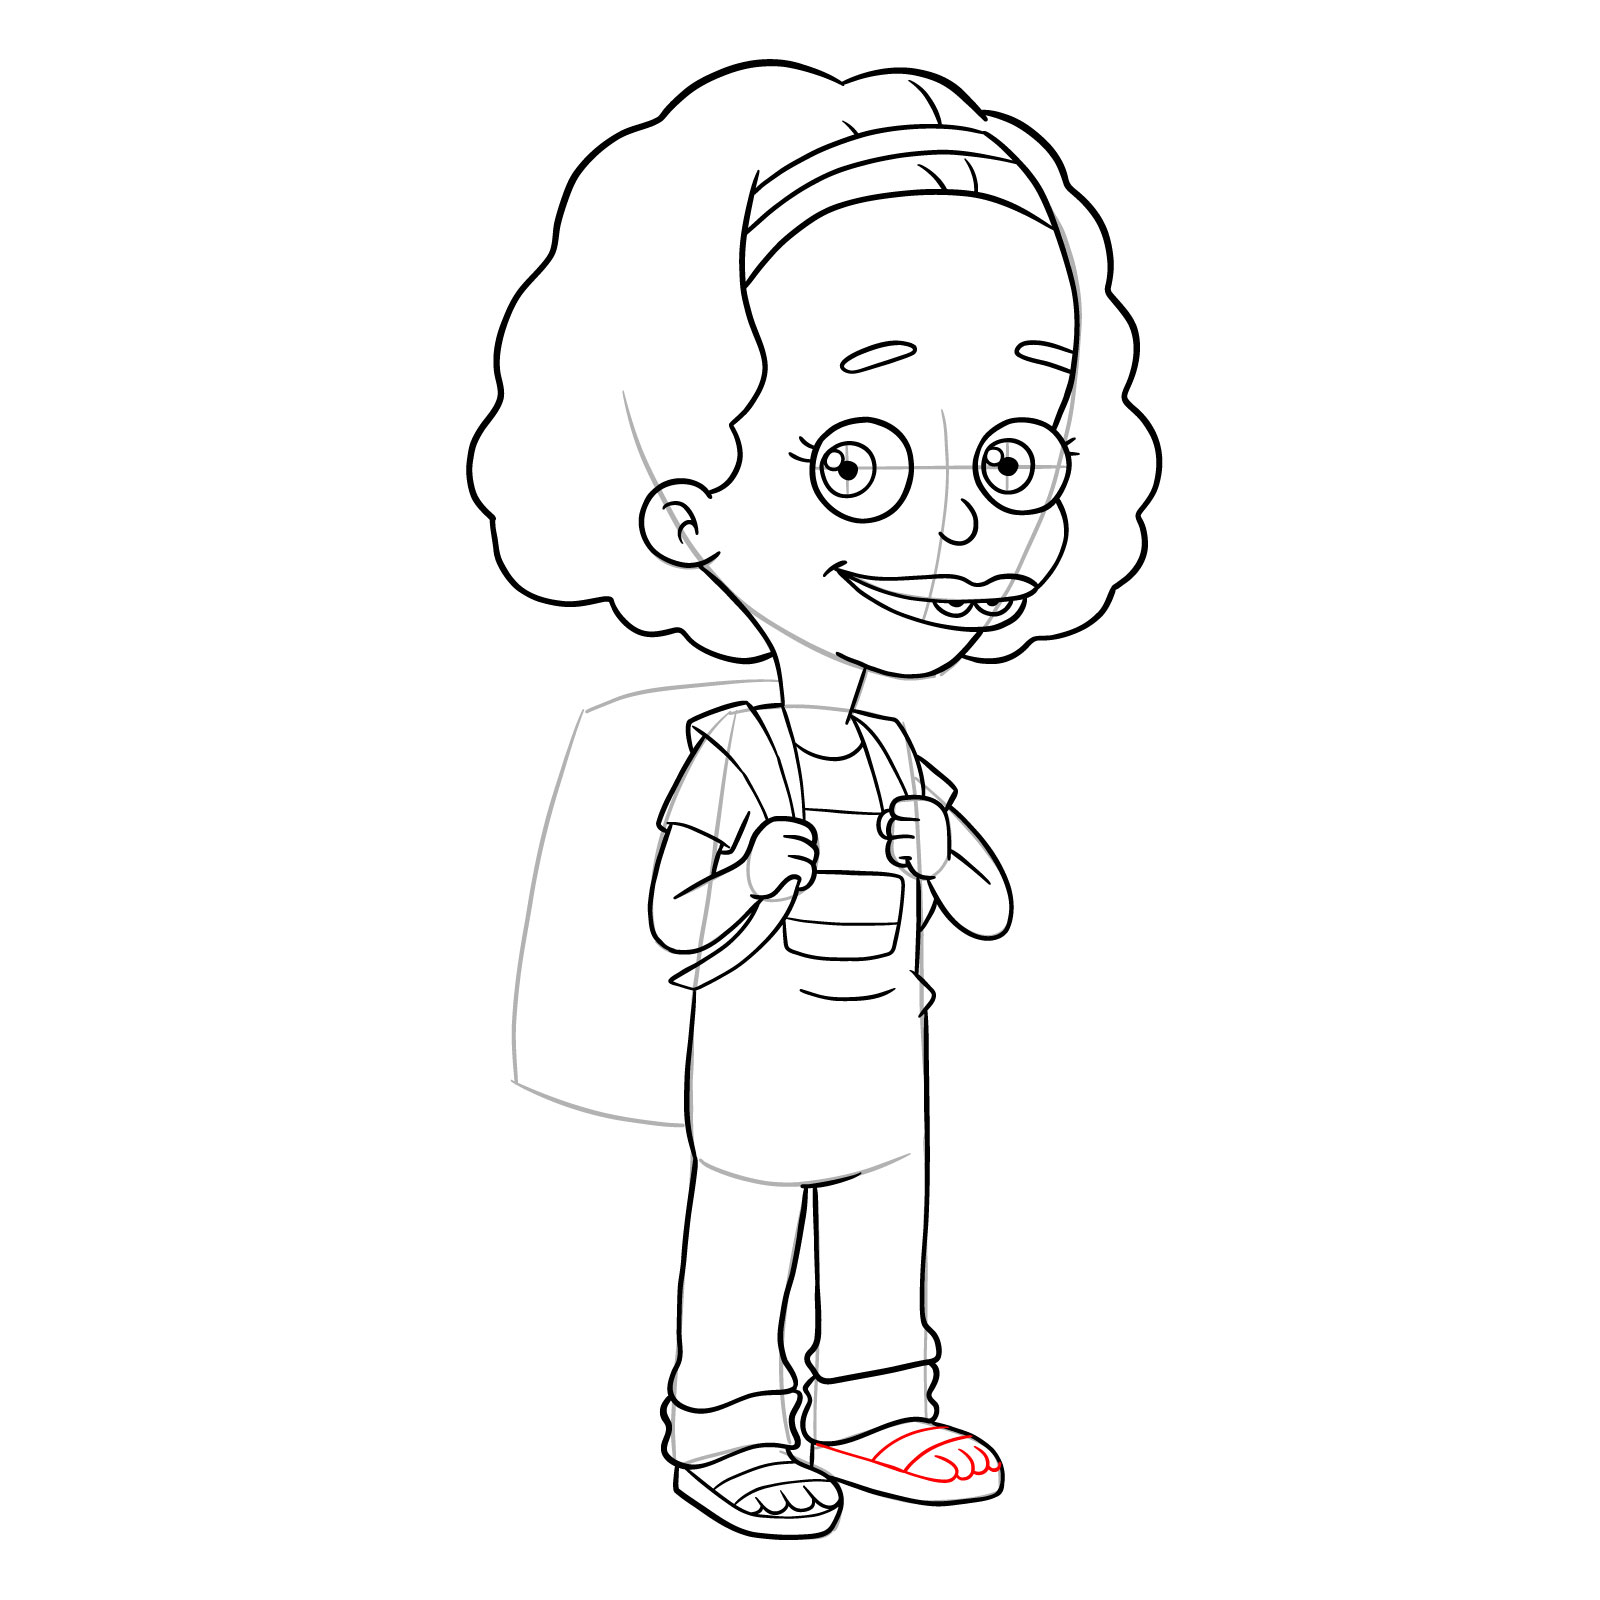 How to draw Missy from Big Mouth - step 28